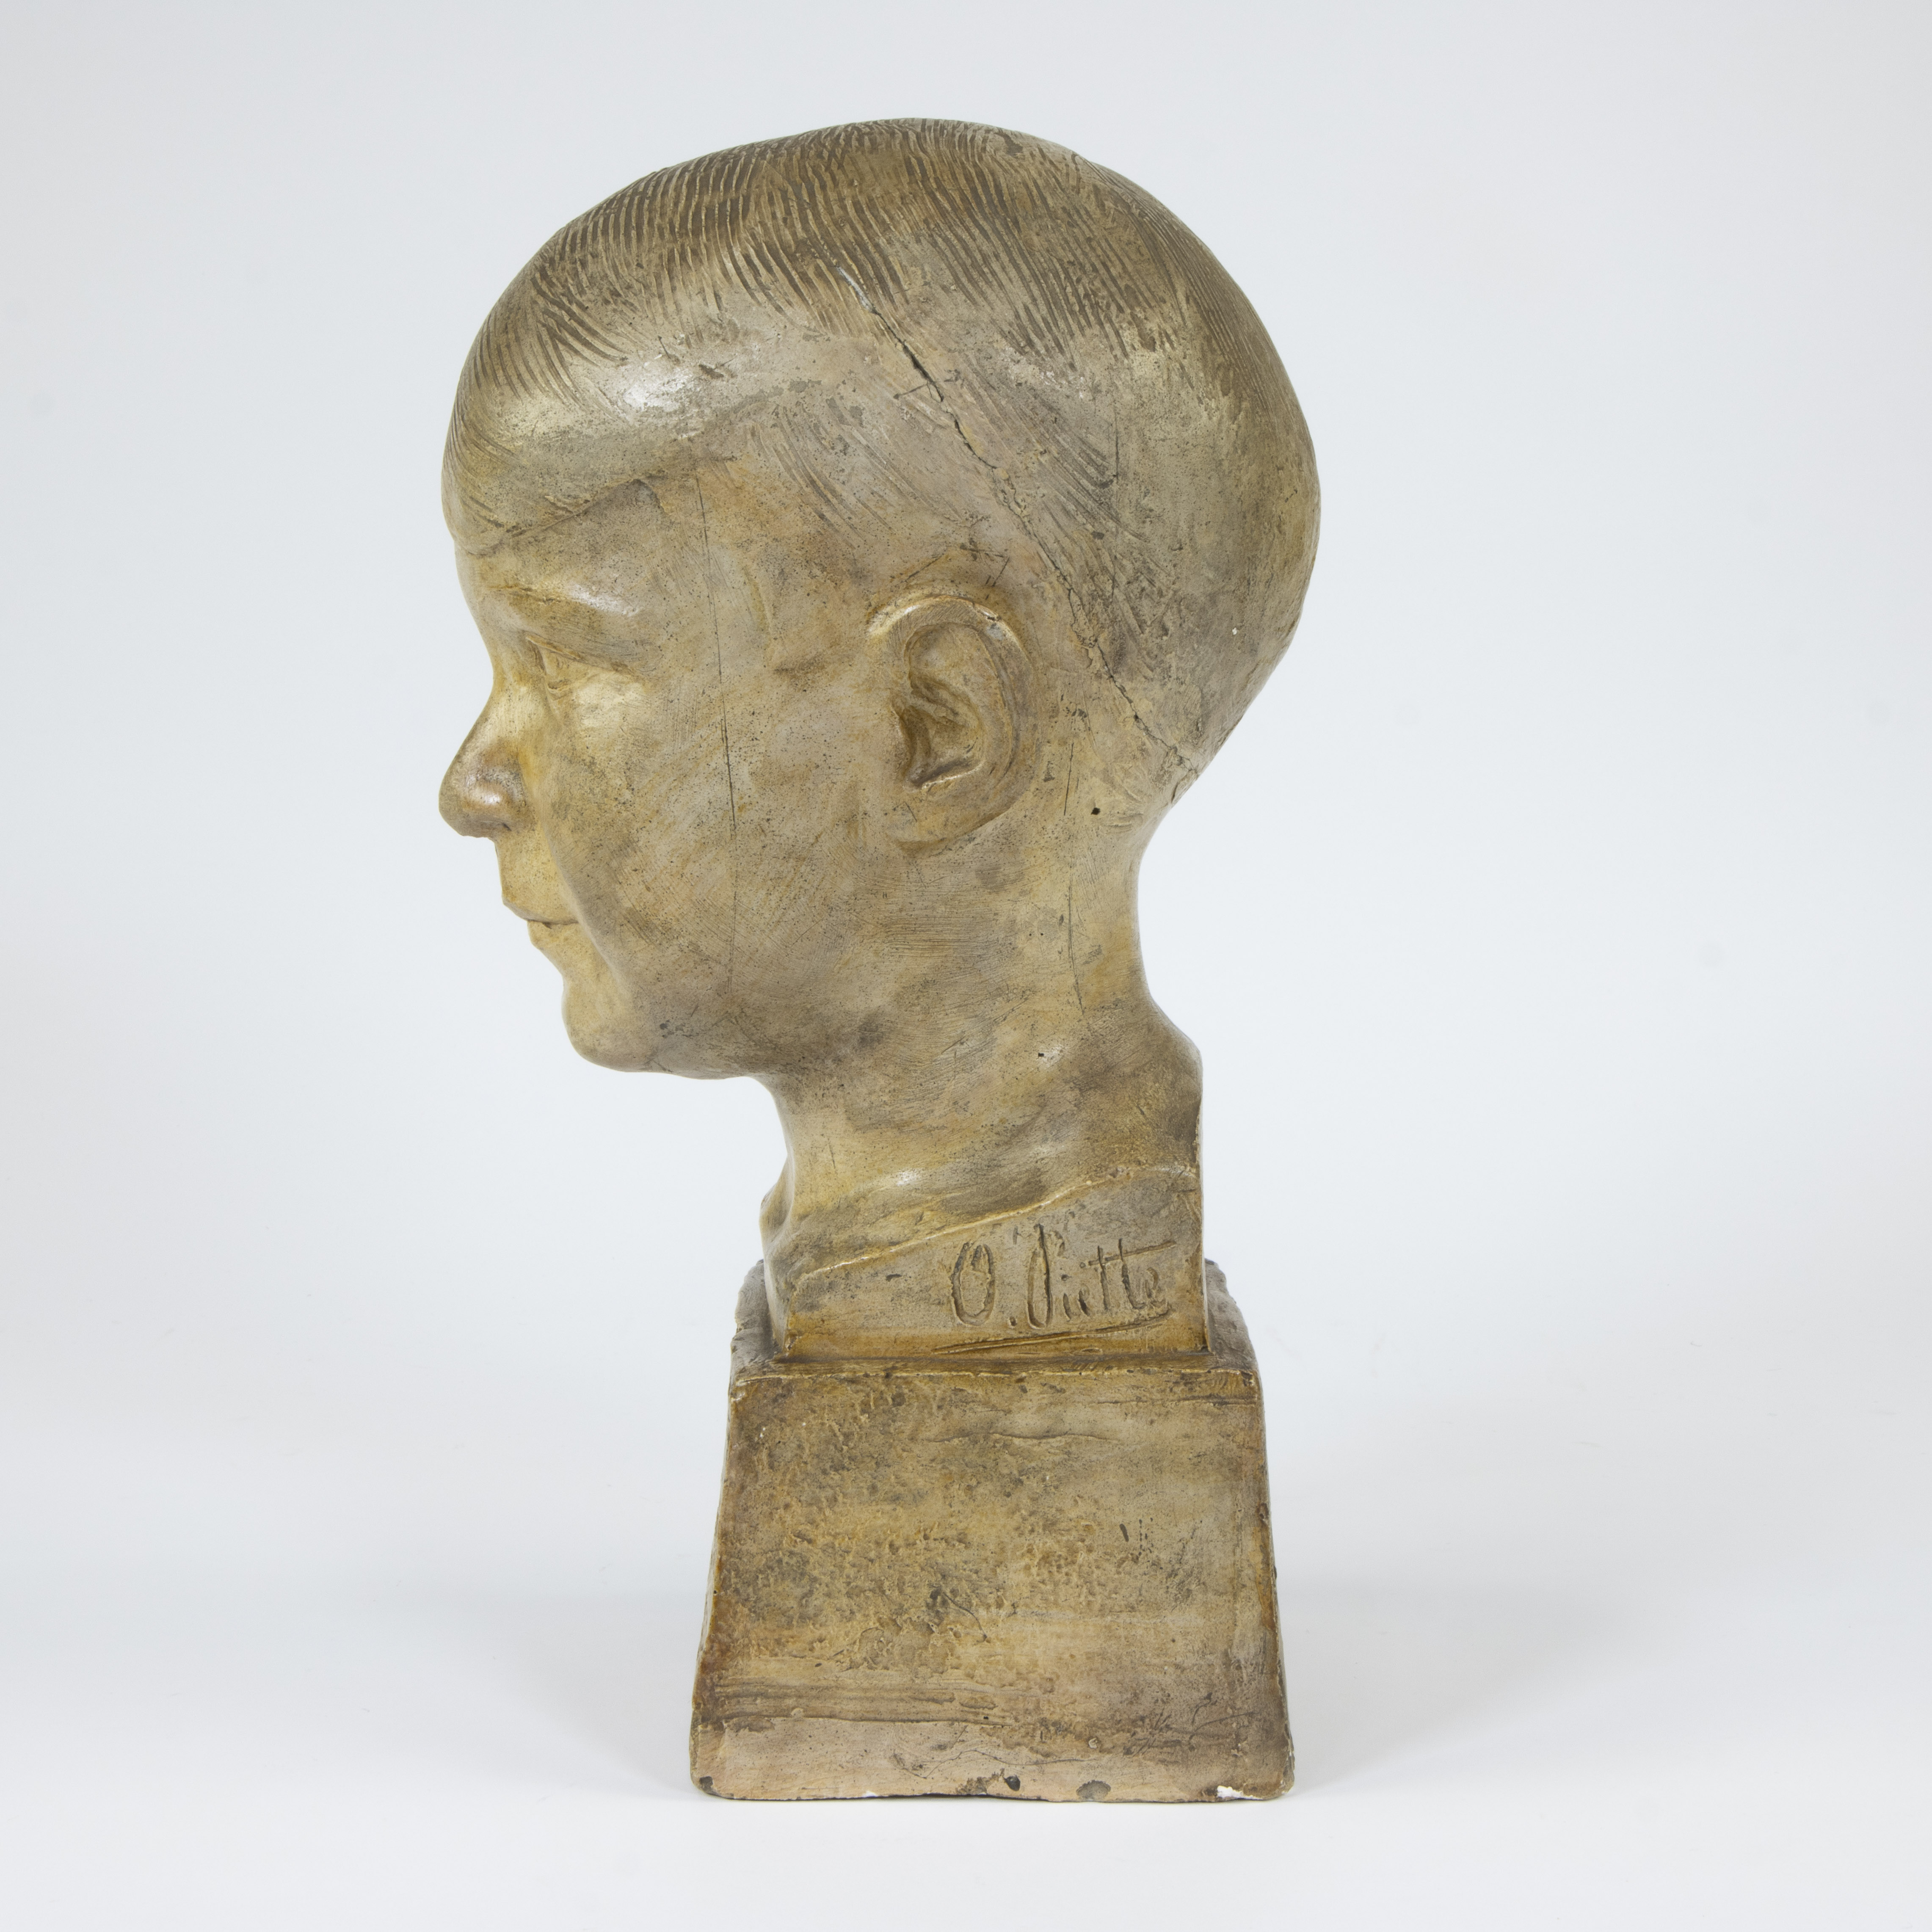 Olivier PIETTE (1885-1948), patinated plaster sculpture of a boy's head, signed - Image 2 of 5